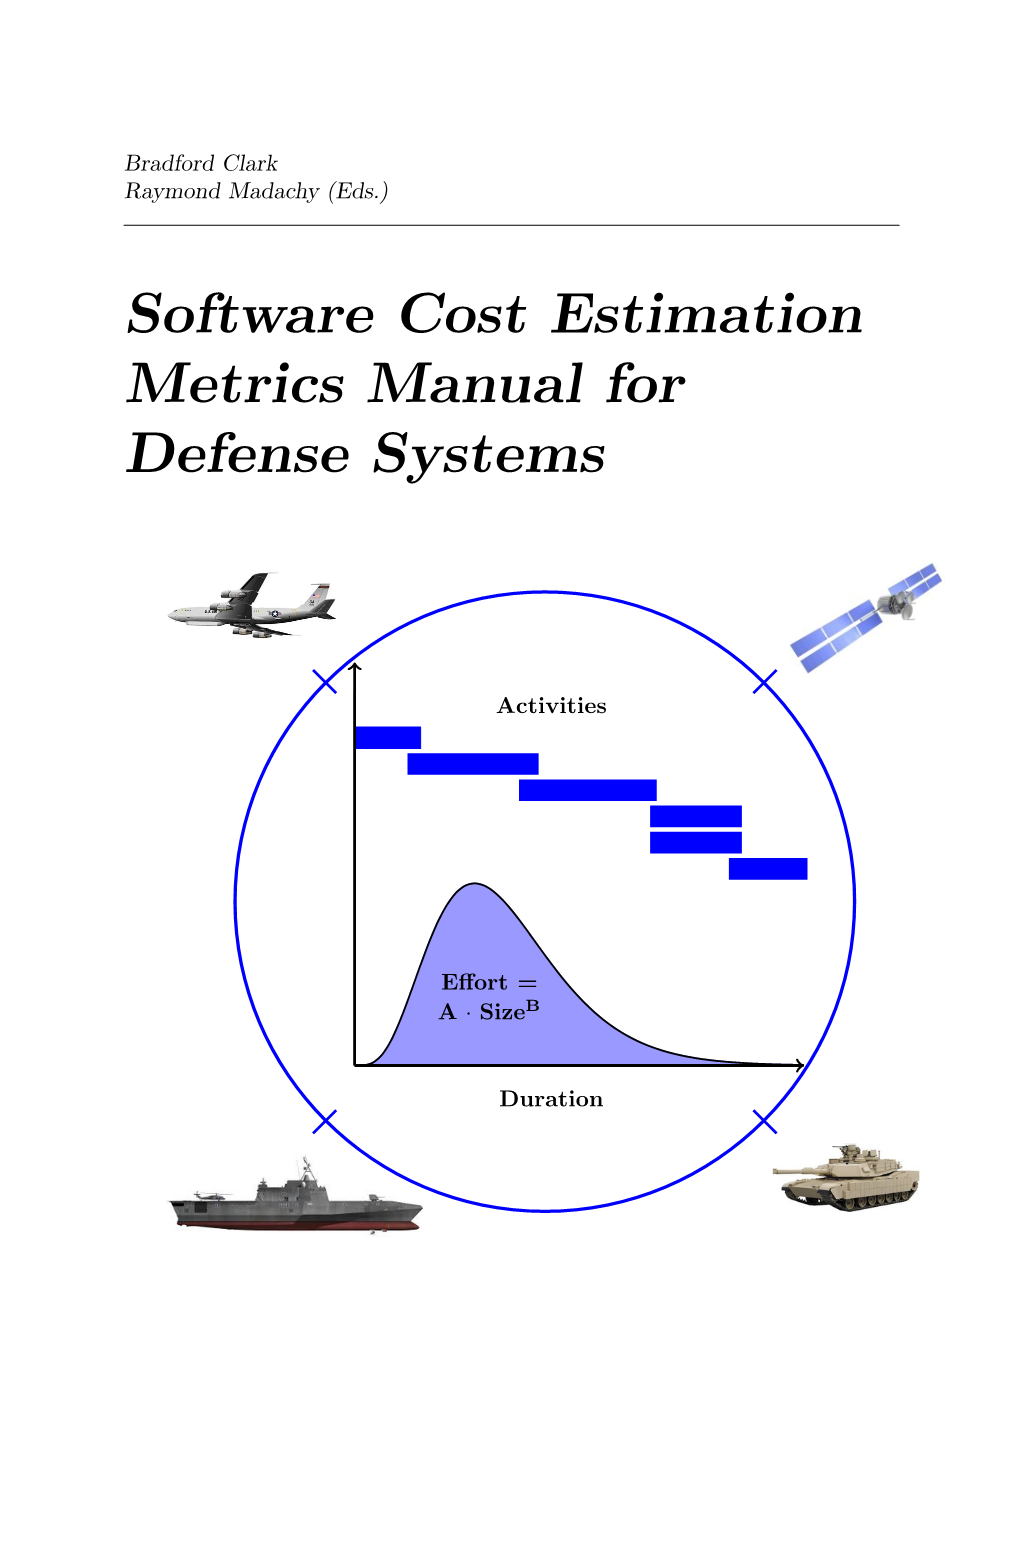 Software Cost Estimation Metrics Manual for Defense Systems